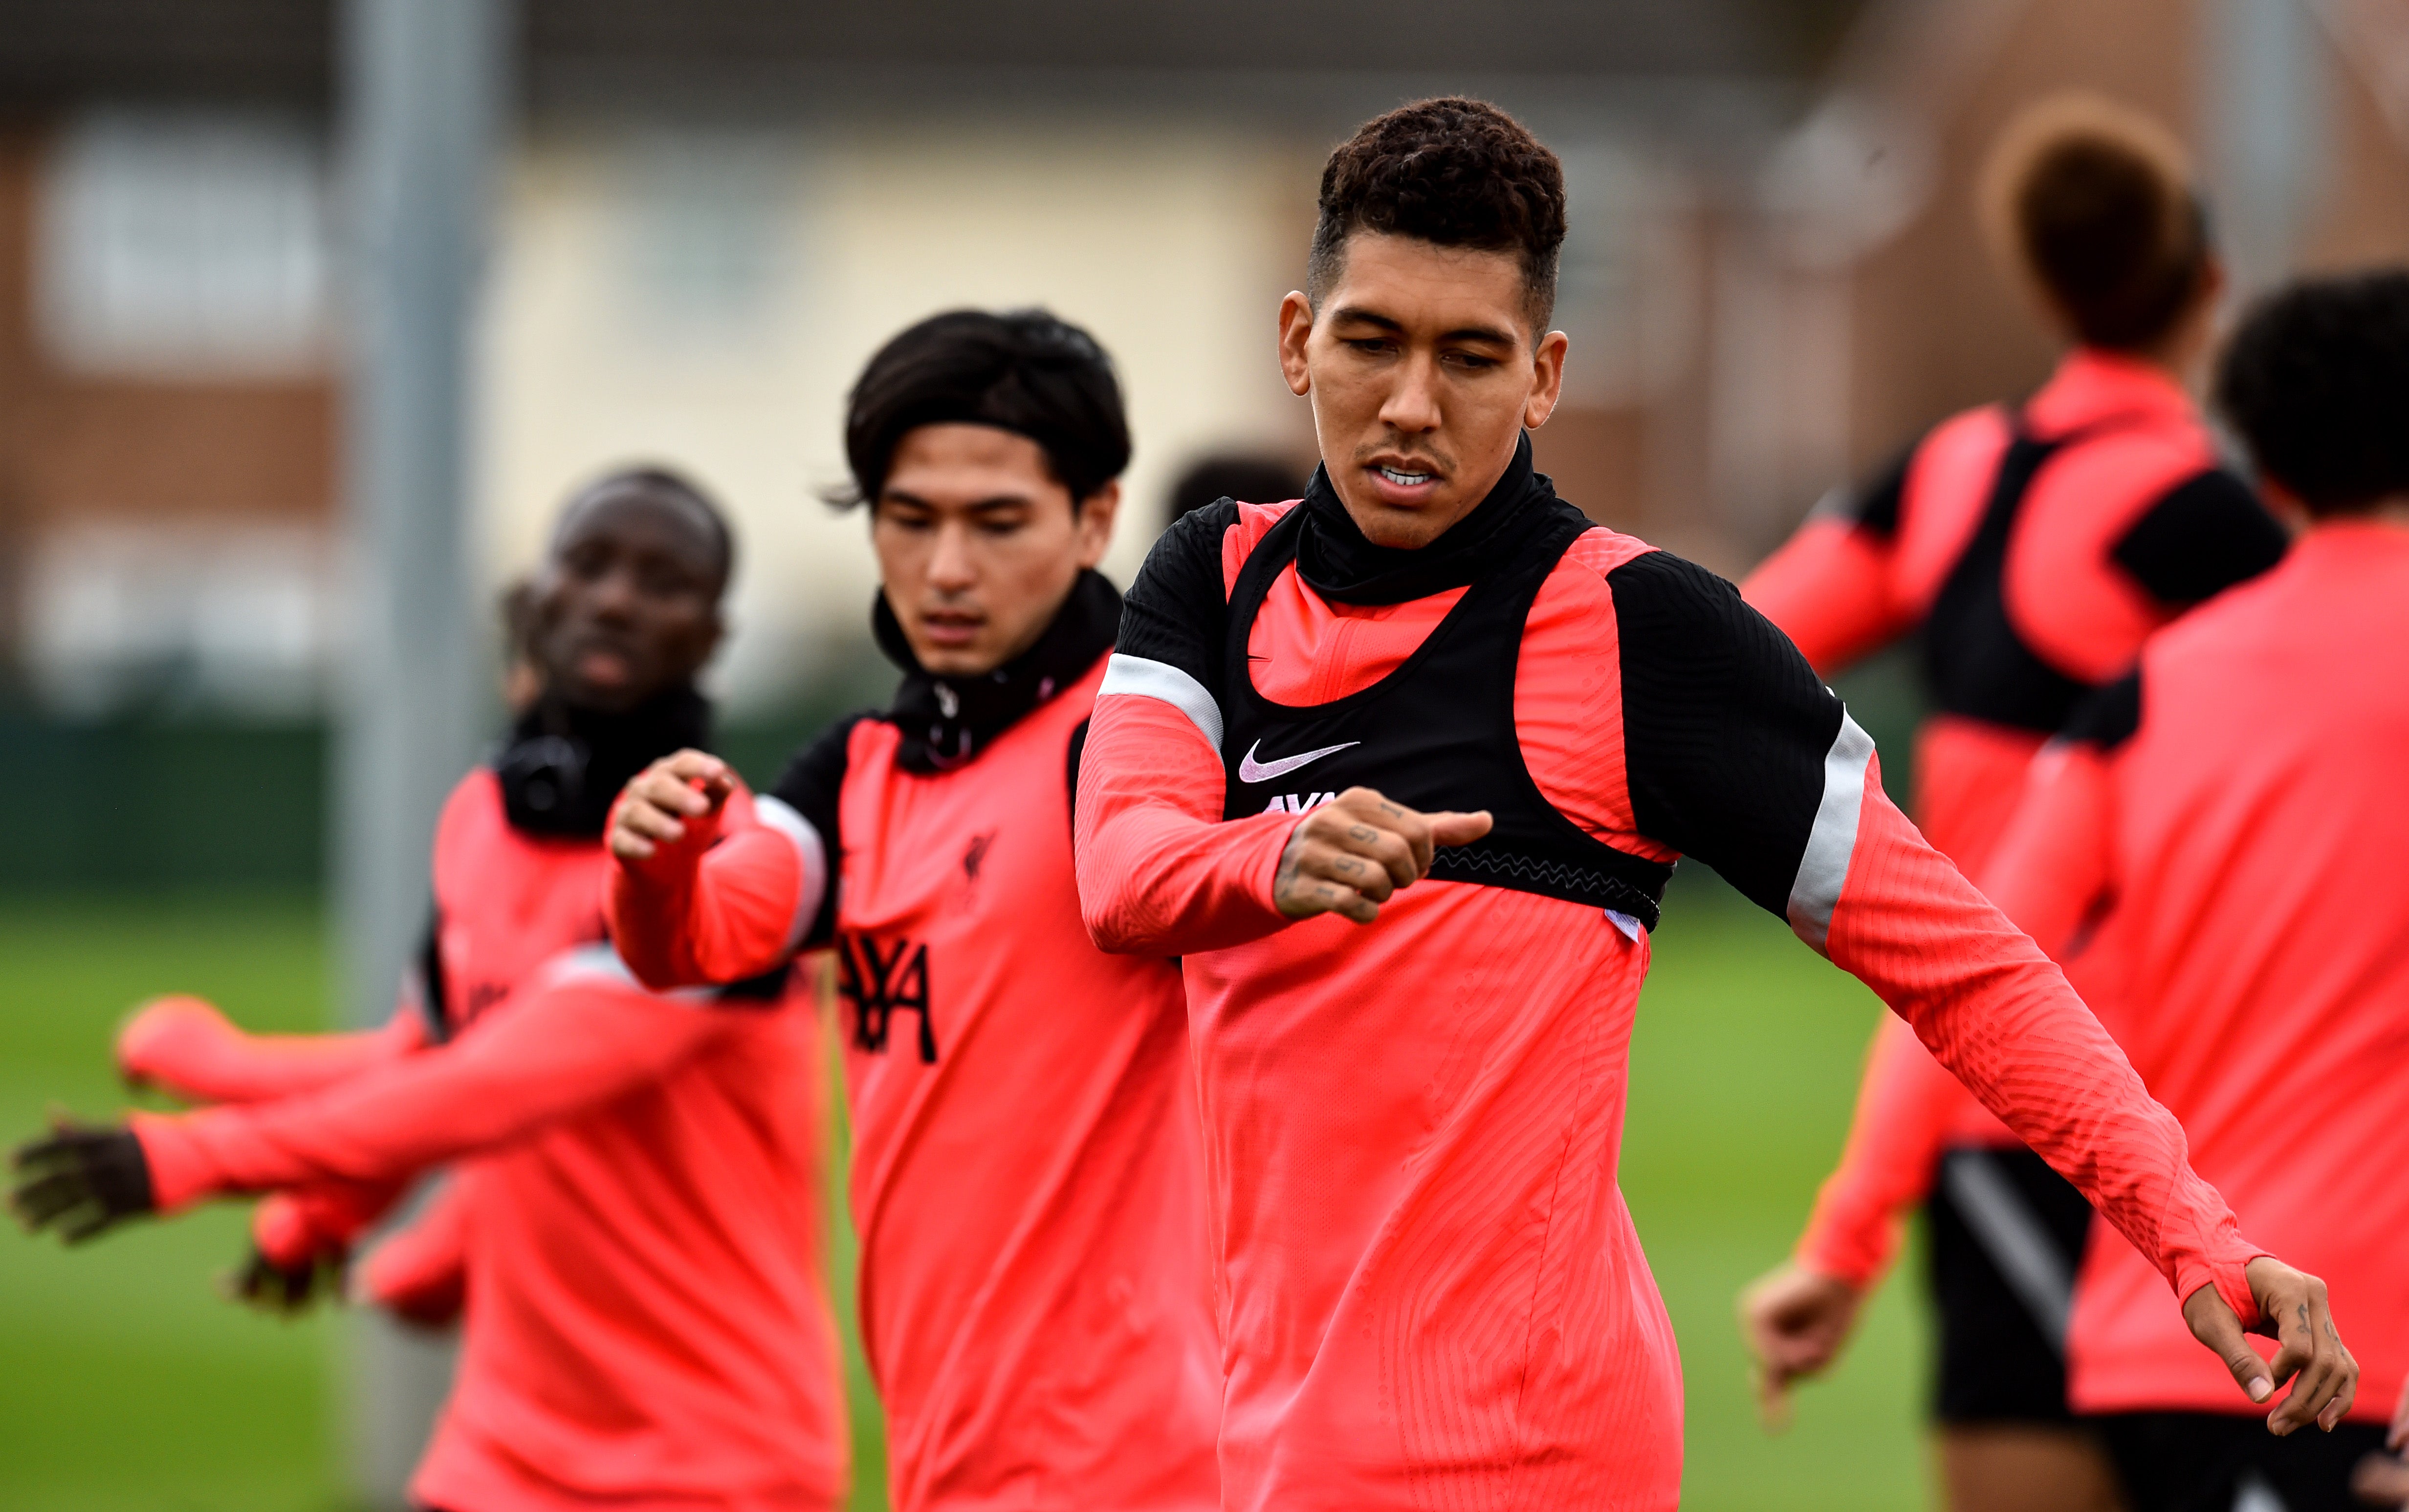 Liverpool players train ahead of their match with Ajax